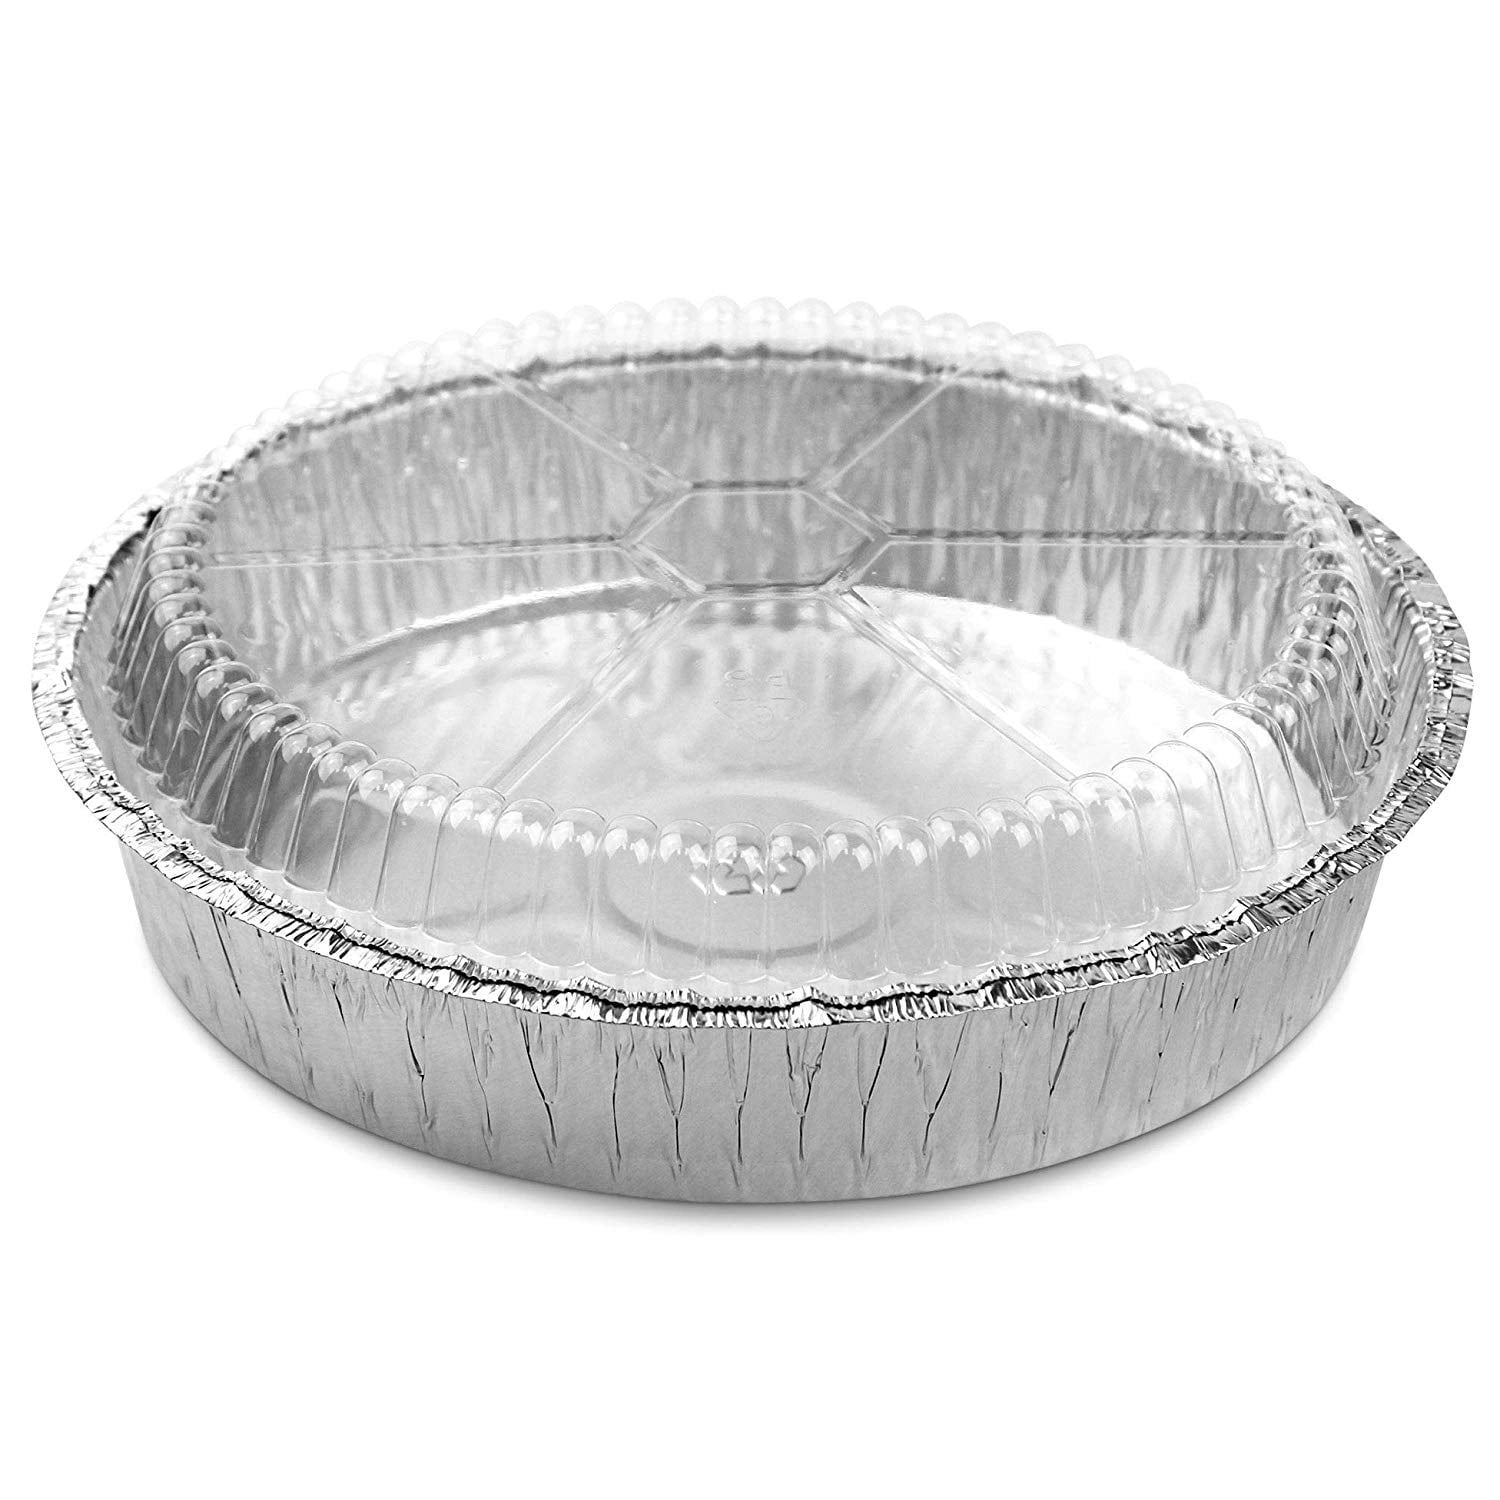 or Cooking 360 Pack Premium 7-Inch Round Foil Pans with Plastic Dome Lids l Heavy Duty l Disposable Aluminum Tin for Roasting Baking